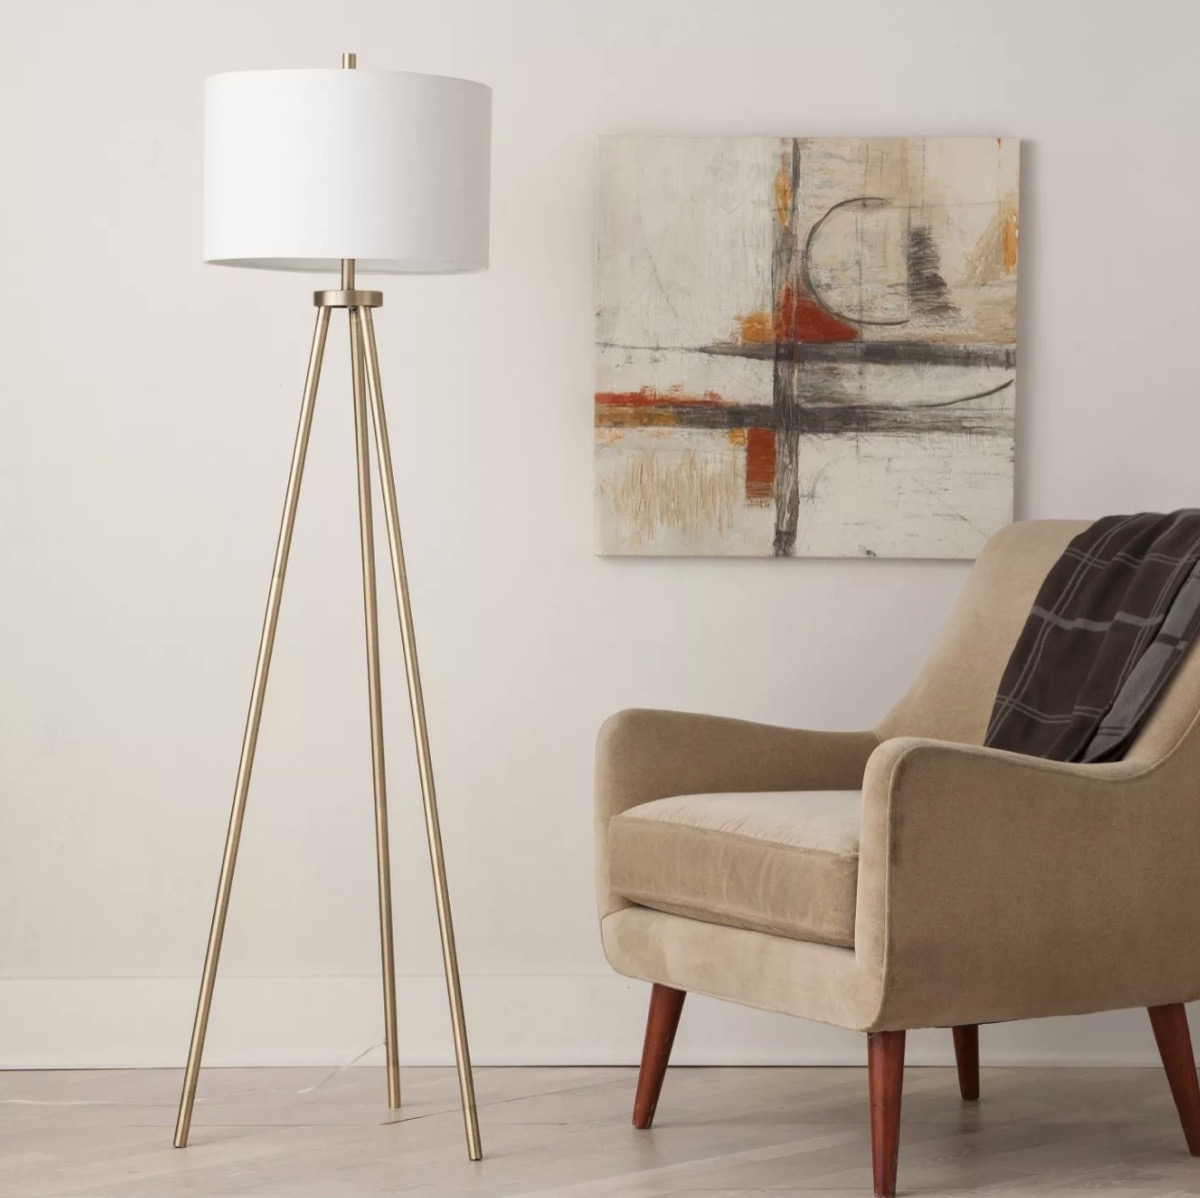 modern living room with lamp and picture and brown chair, target home decor items